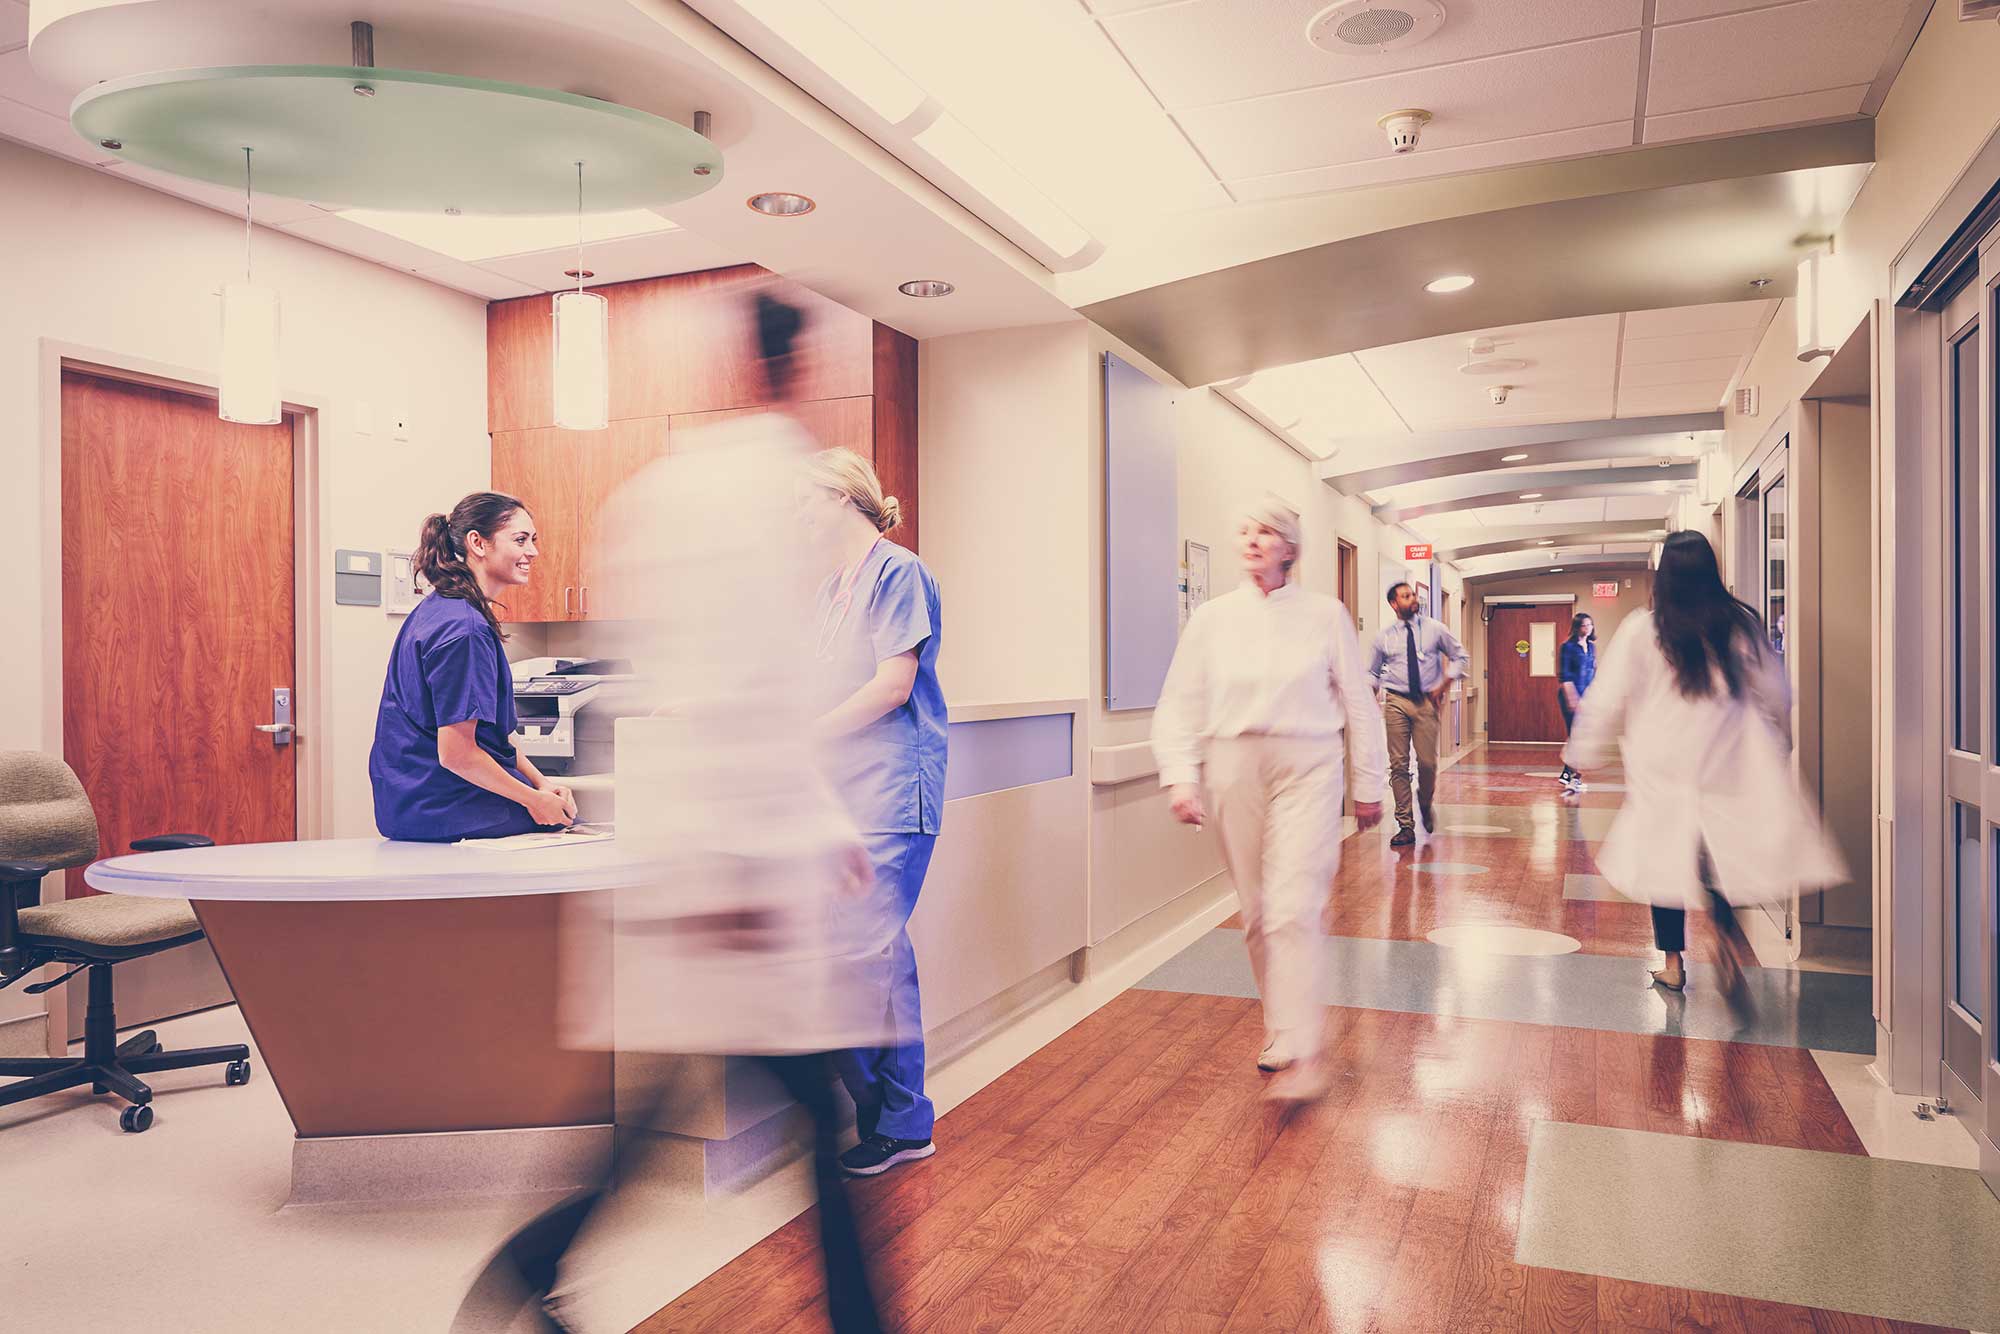 5 Reasons a Site Survey Will Increase Hospitals' WiFi Performance